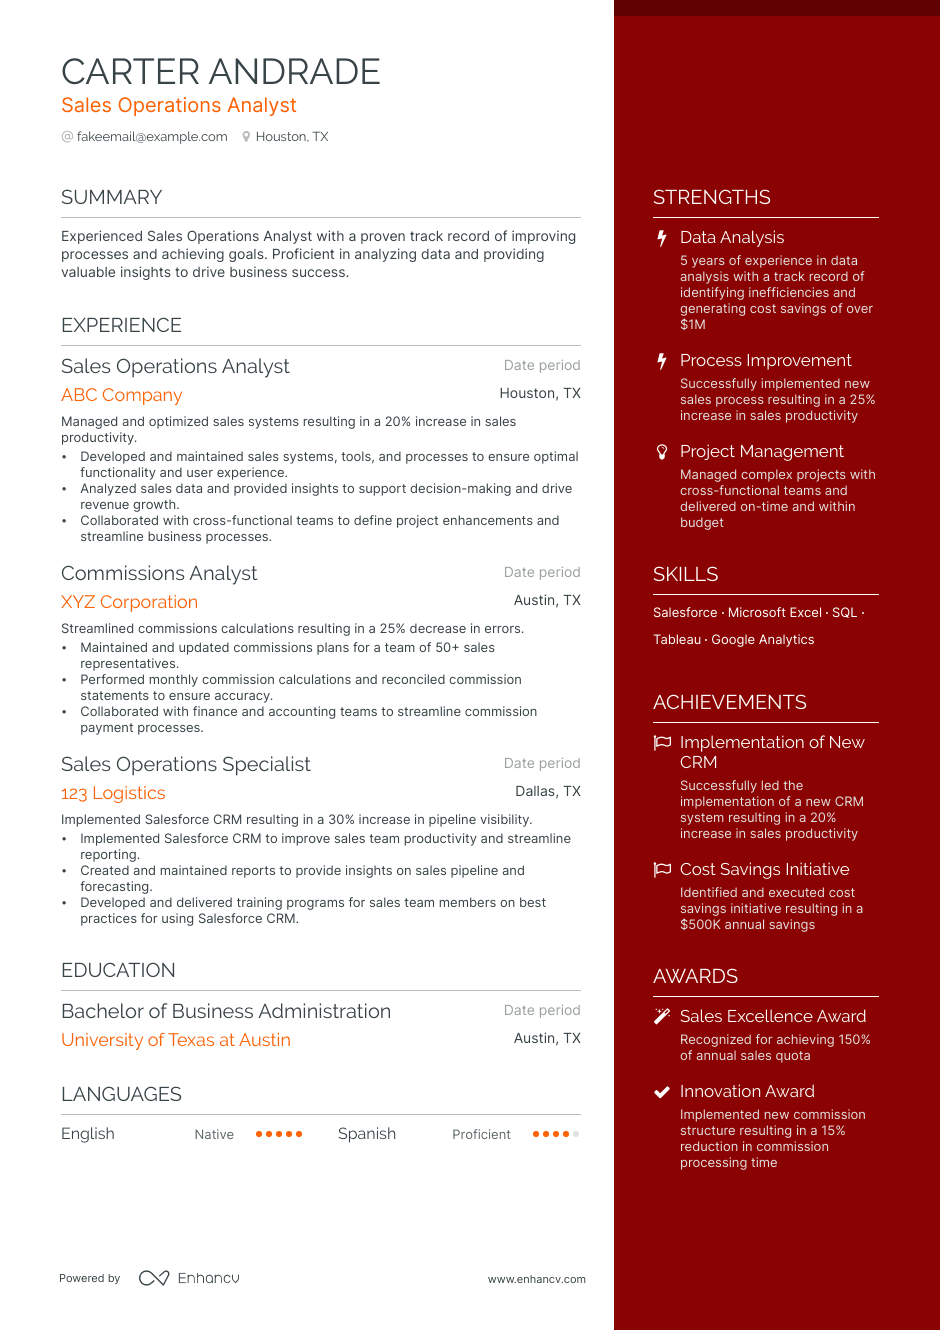 Sales Operations Analyst resume example